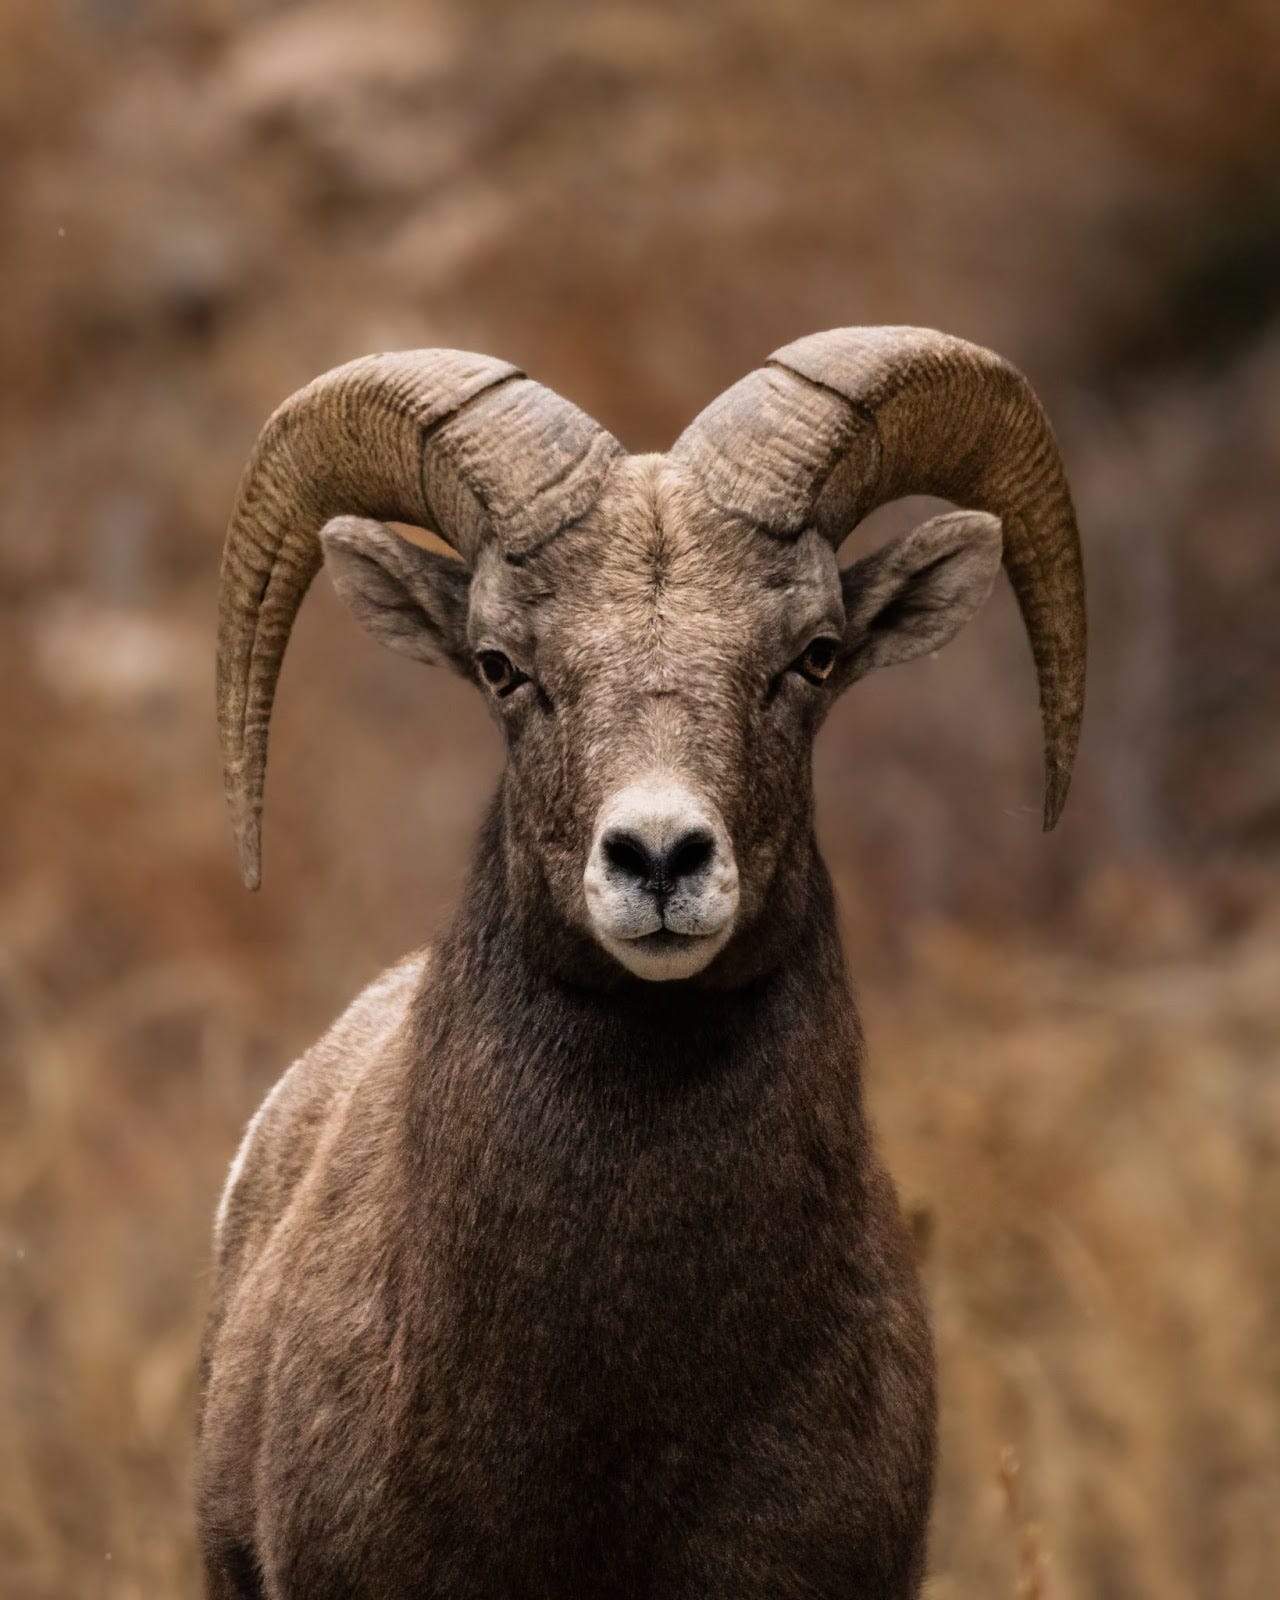 Marco Polo Sheep the rarest Animal in the World | by Ijlal Ahmed | Medium